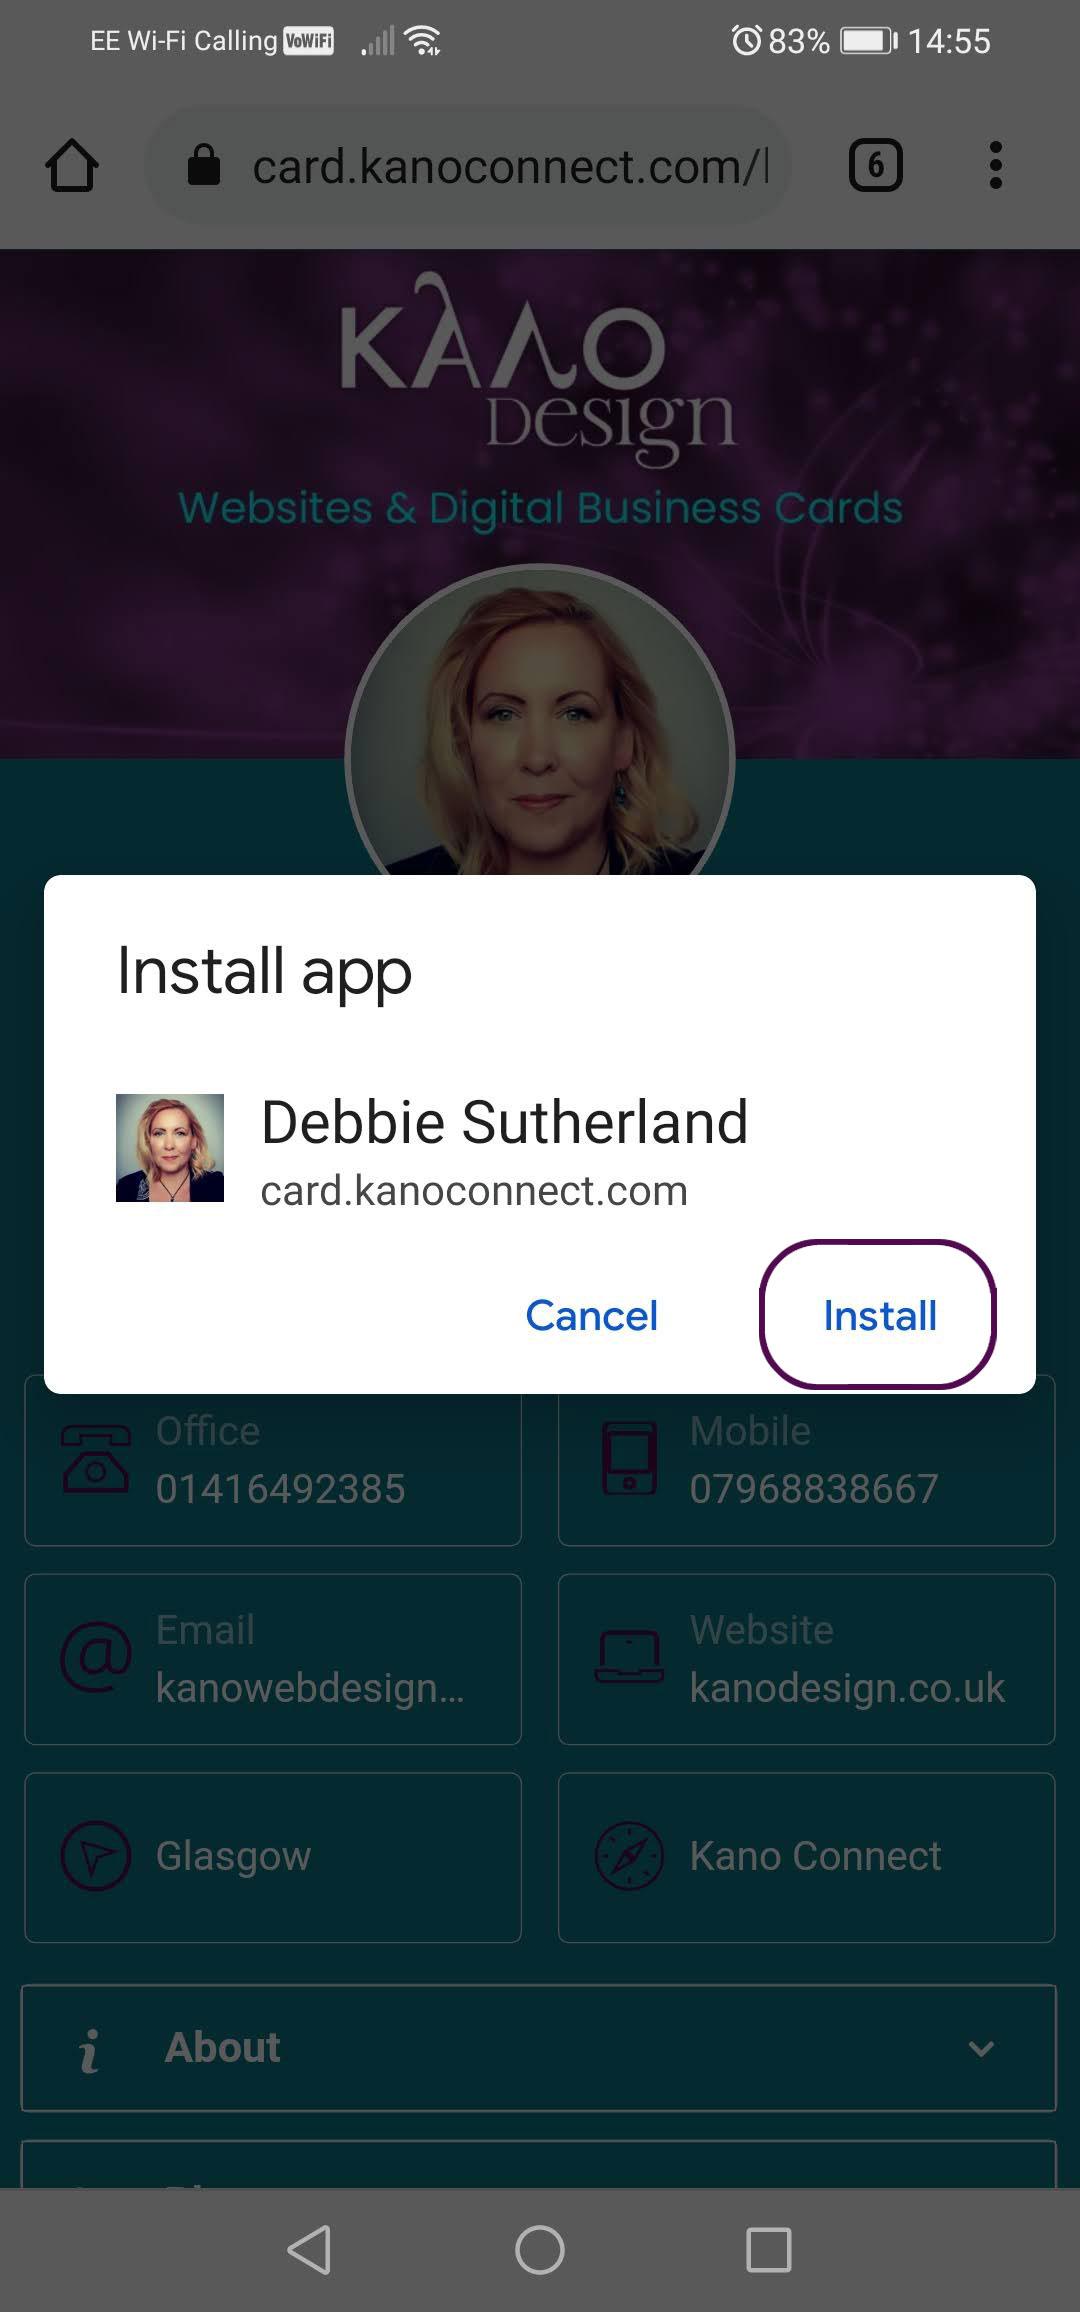 Saving Digital Business Card to Home Screen - Android